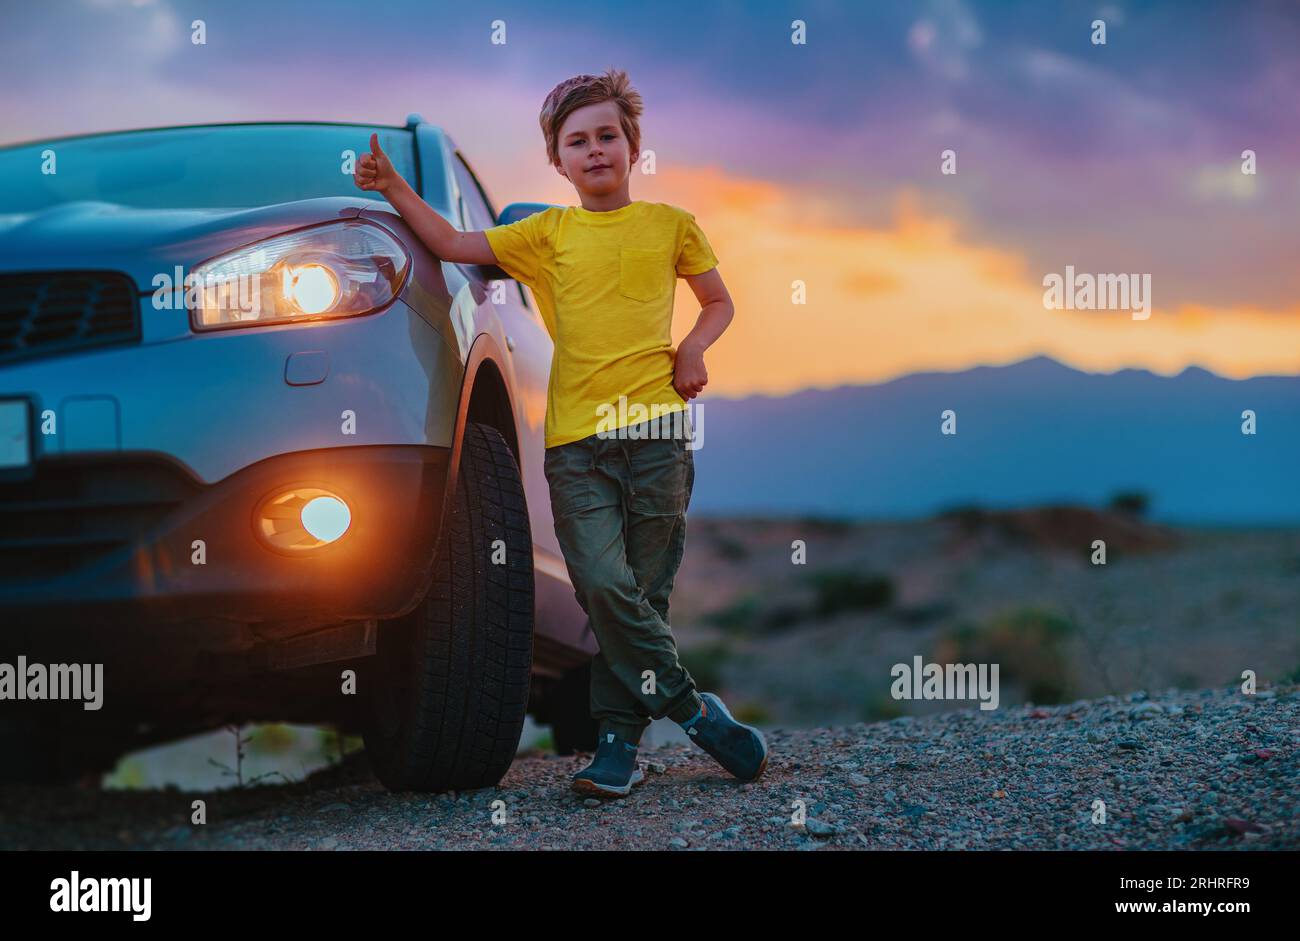 Successful boy standing by the car and showing thumbs up at twilight on mountains background Stock Photo